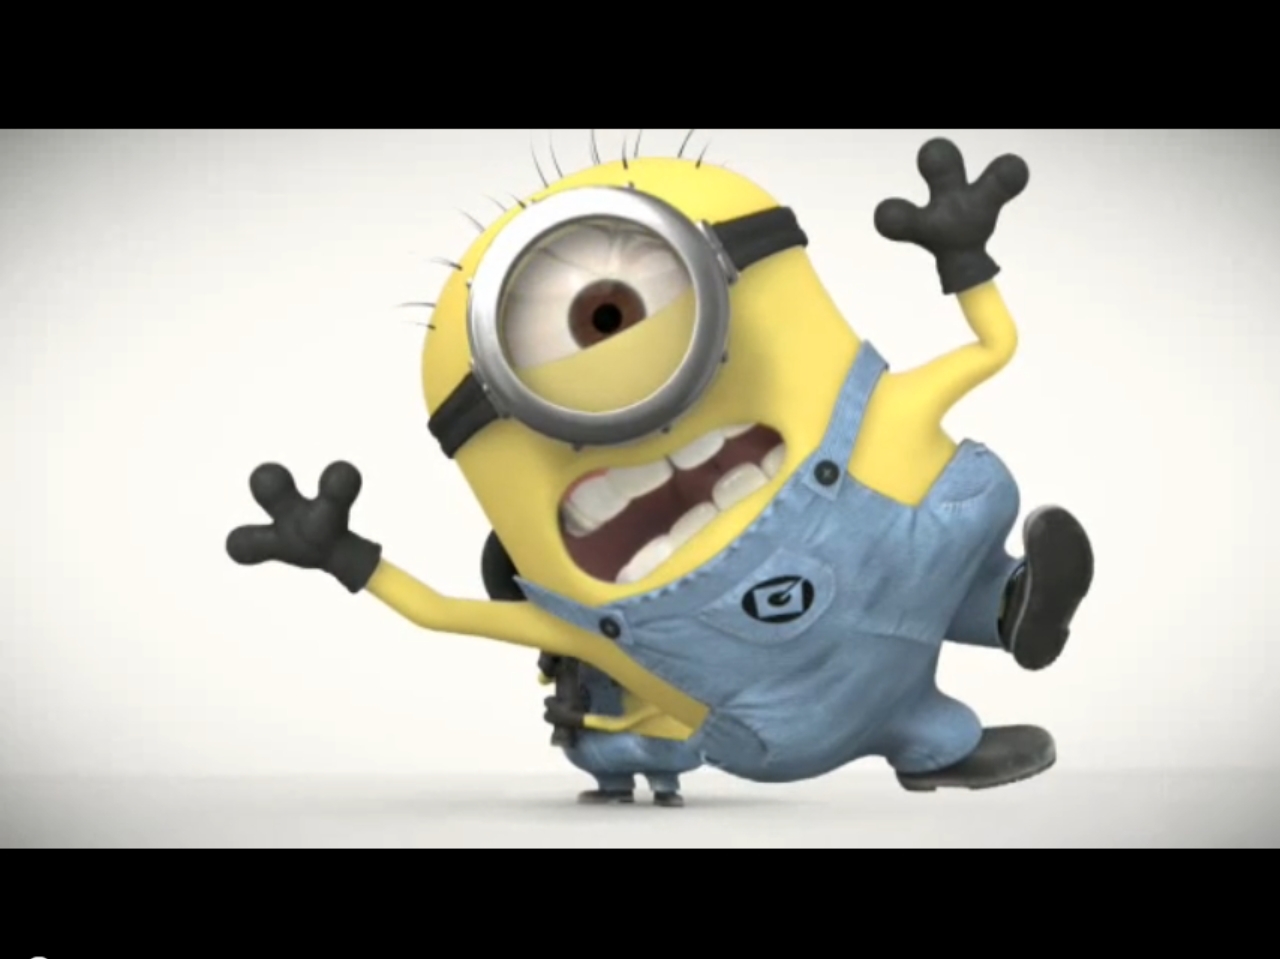 Minions Despicable Me Minions   Free Images At Clker Com   Vector Clip